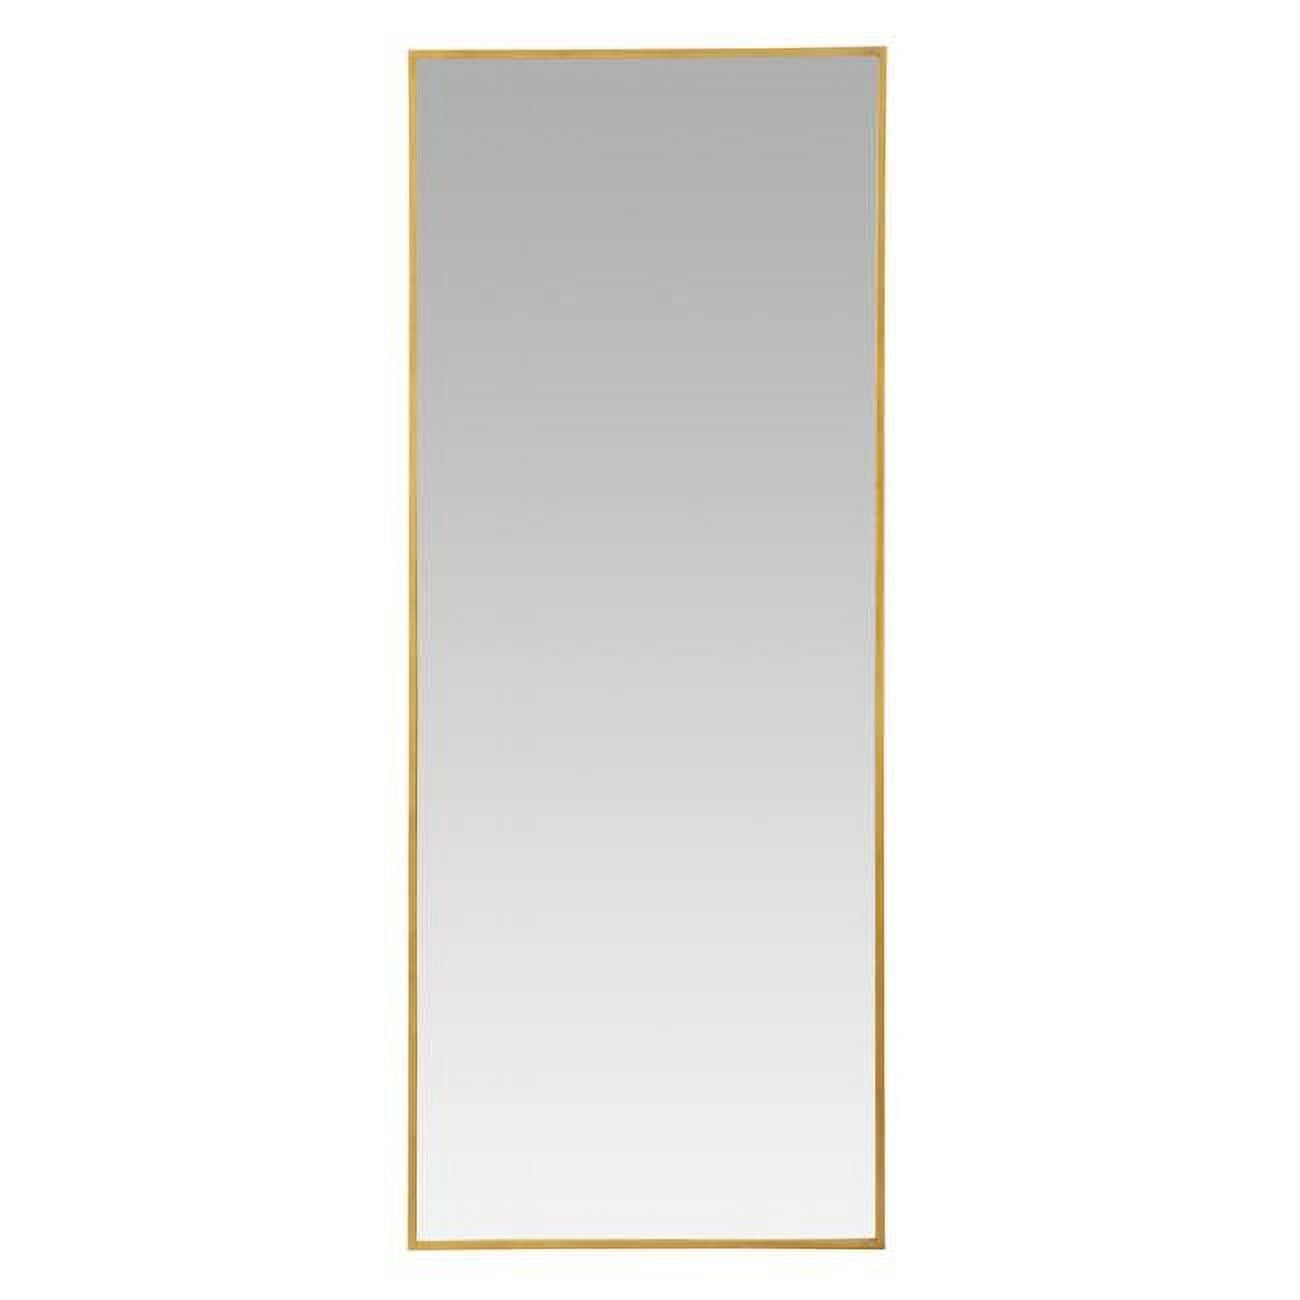 Picture of Aspire Home Accents 7579 Bali Modern Floor Mirror - Gold